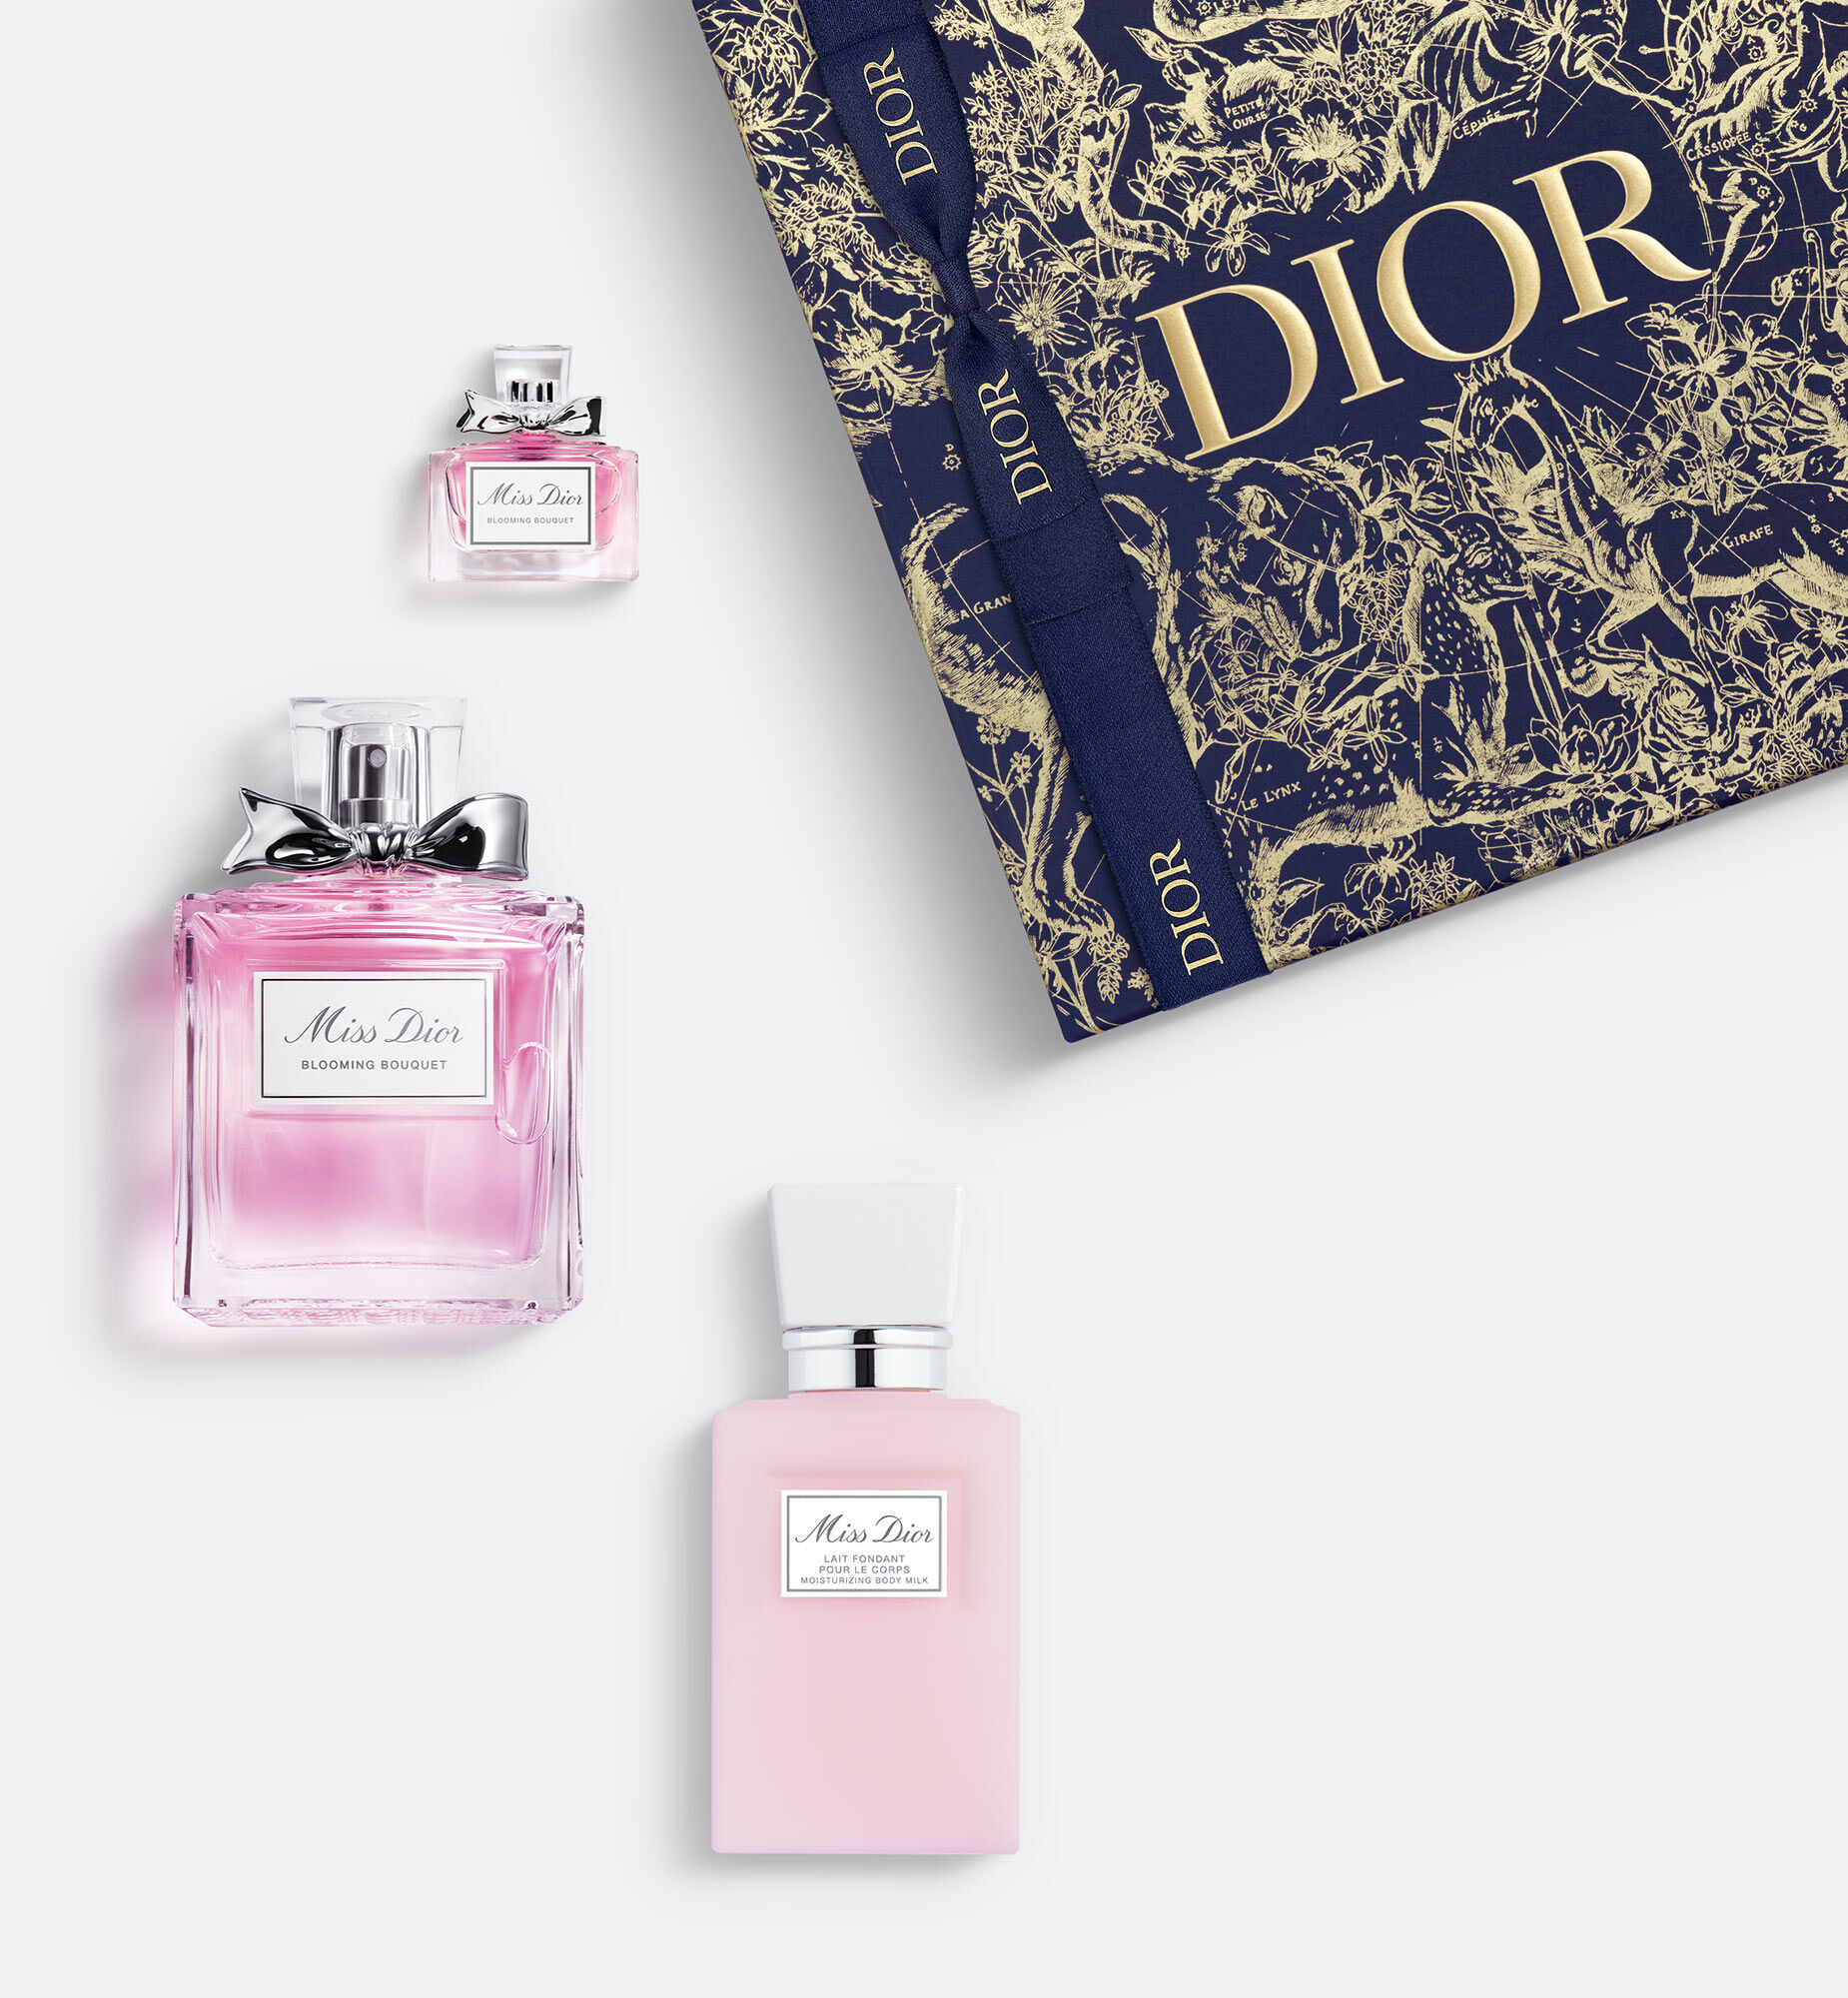 Chia sẻ hơn 75 về miss dior blooming bouquet opinie  cdgdbentreeduvn